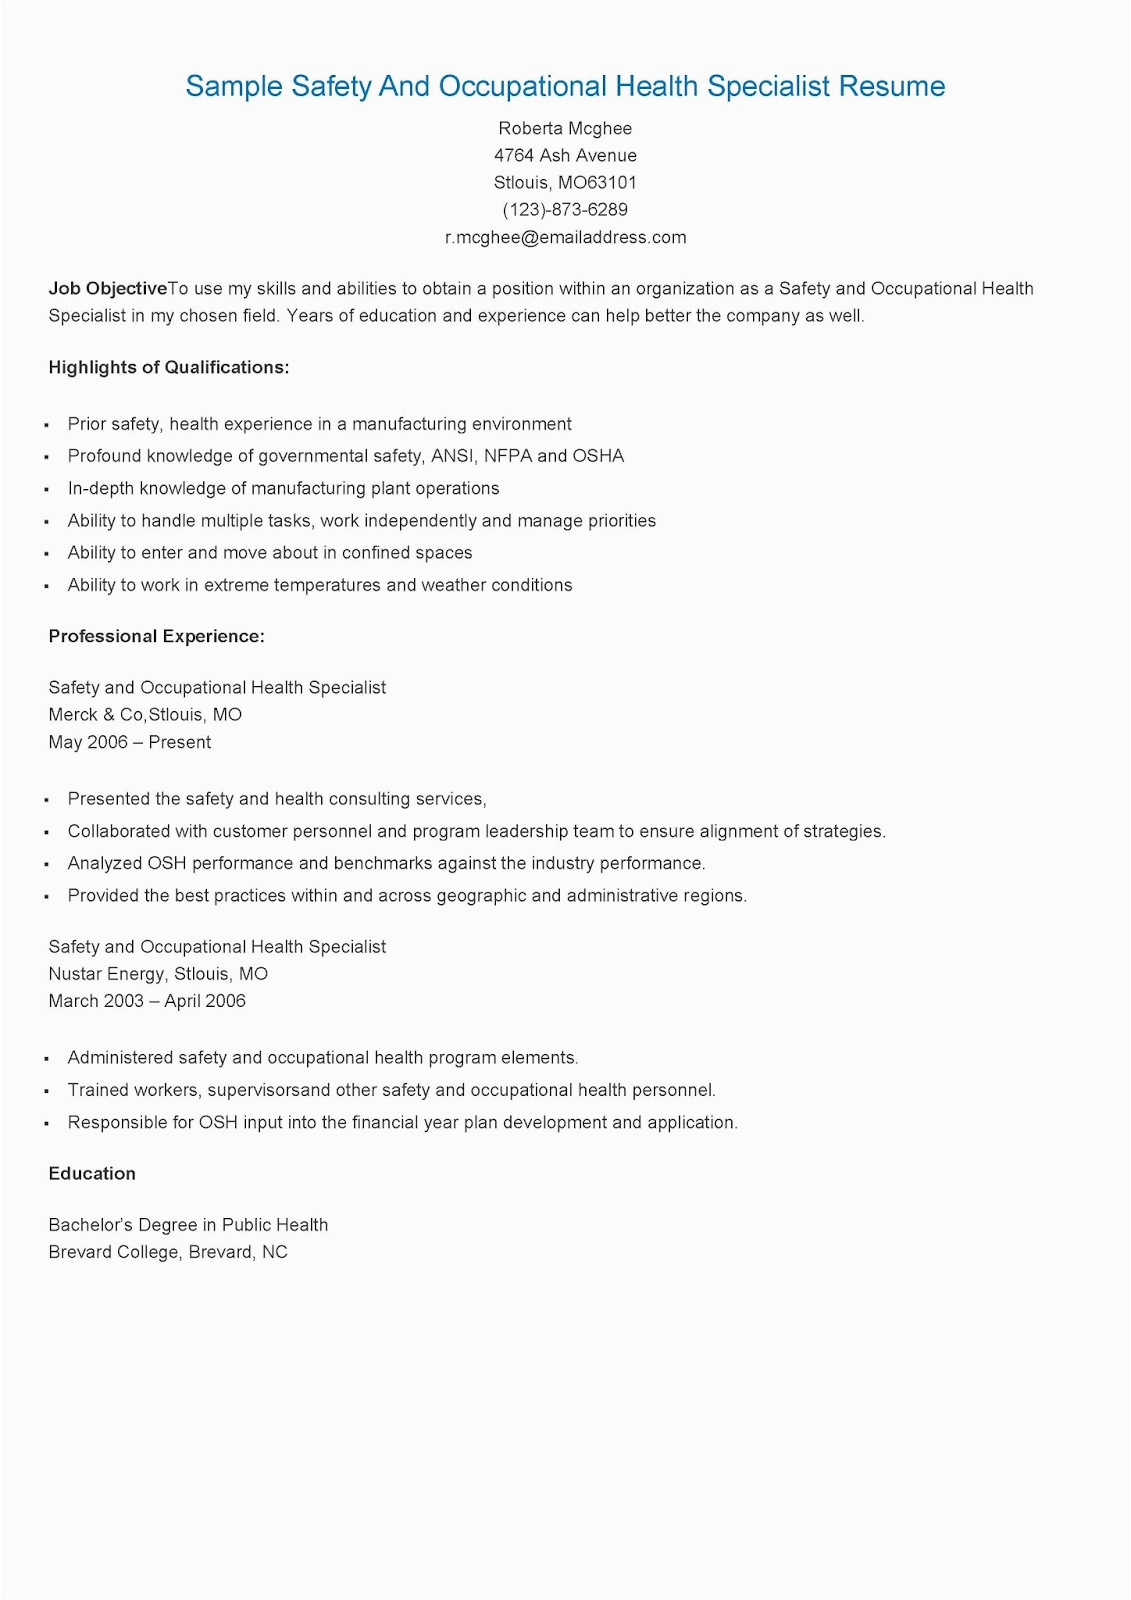 Safety and Occupational Health Specialist Sample Resume Resume Samples Sample Safety and Occupational Health Specialist Resume